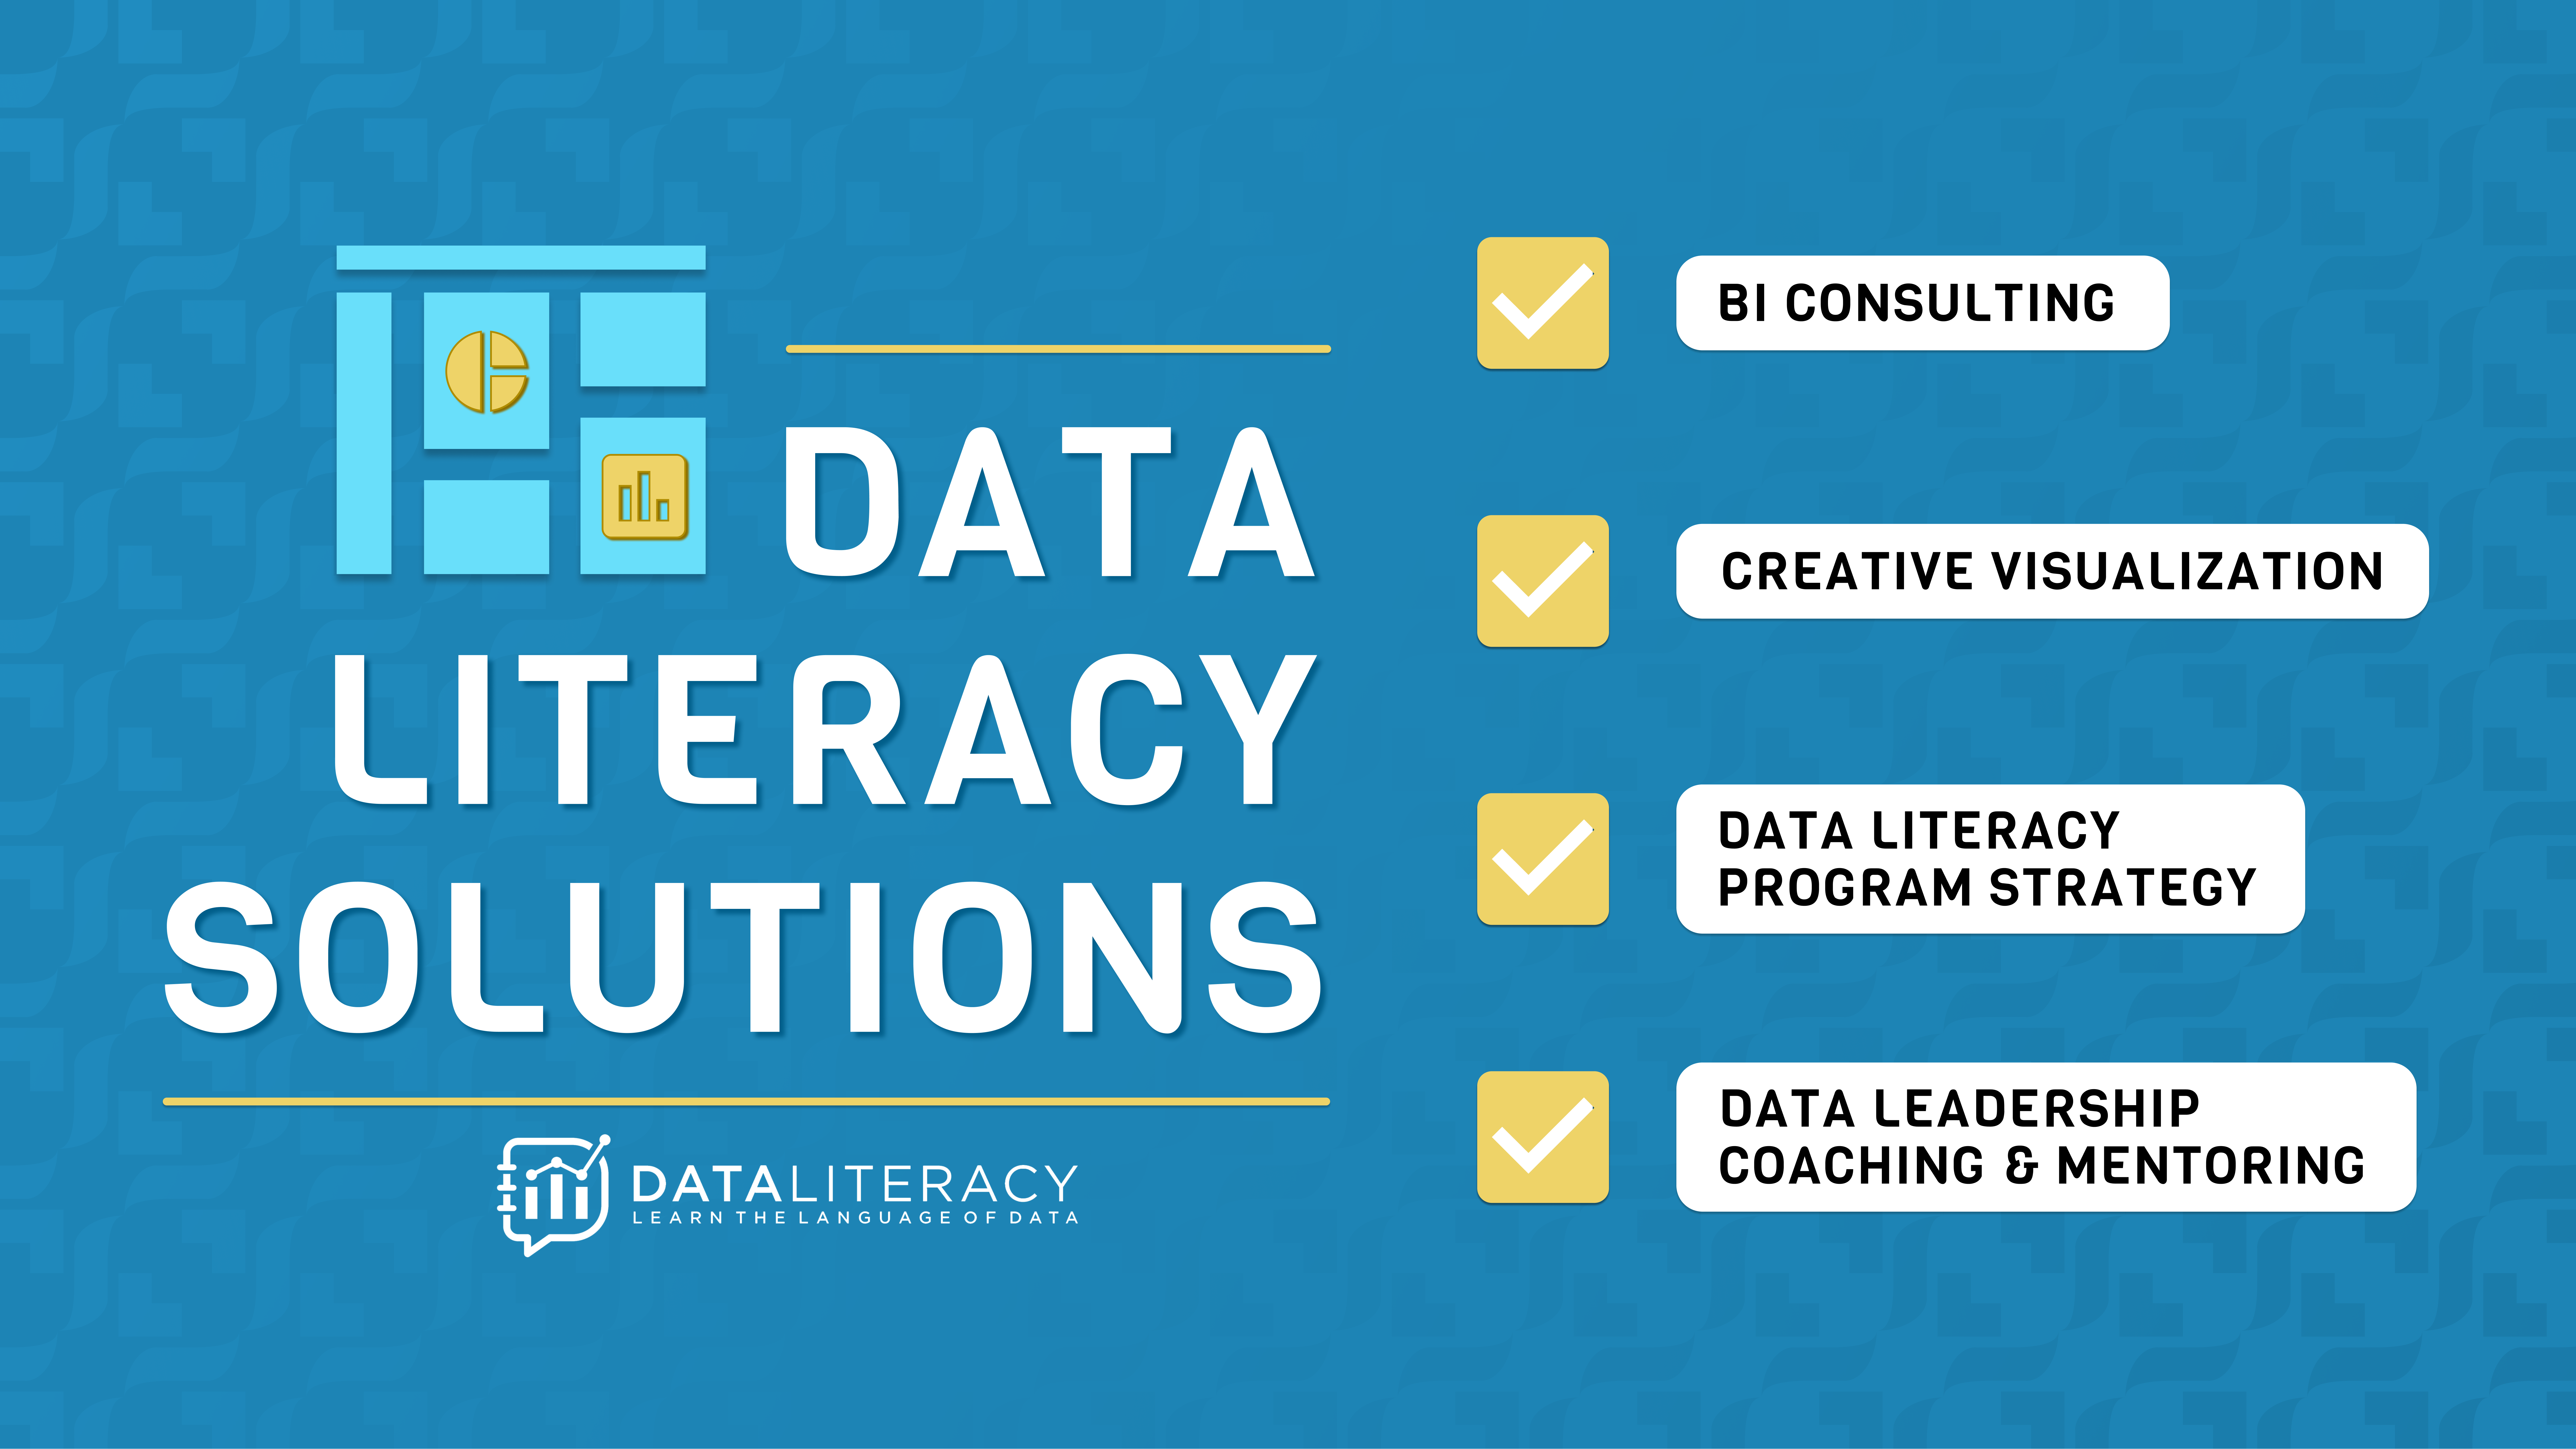 NOW OFFERING: Data Literacy Solutions | Data Literacy | Data Literacy  